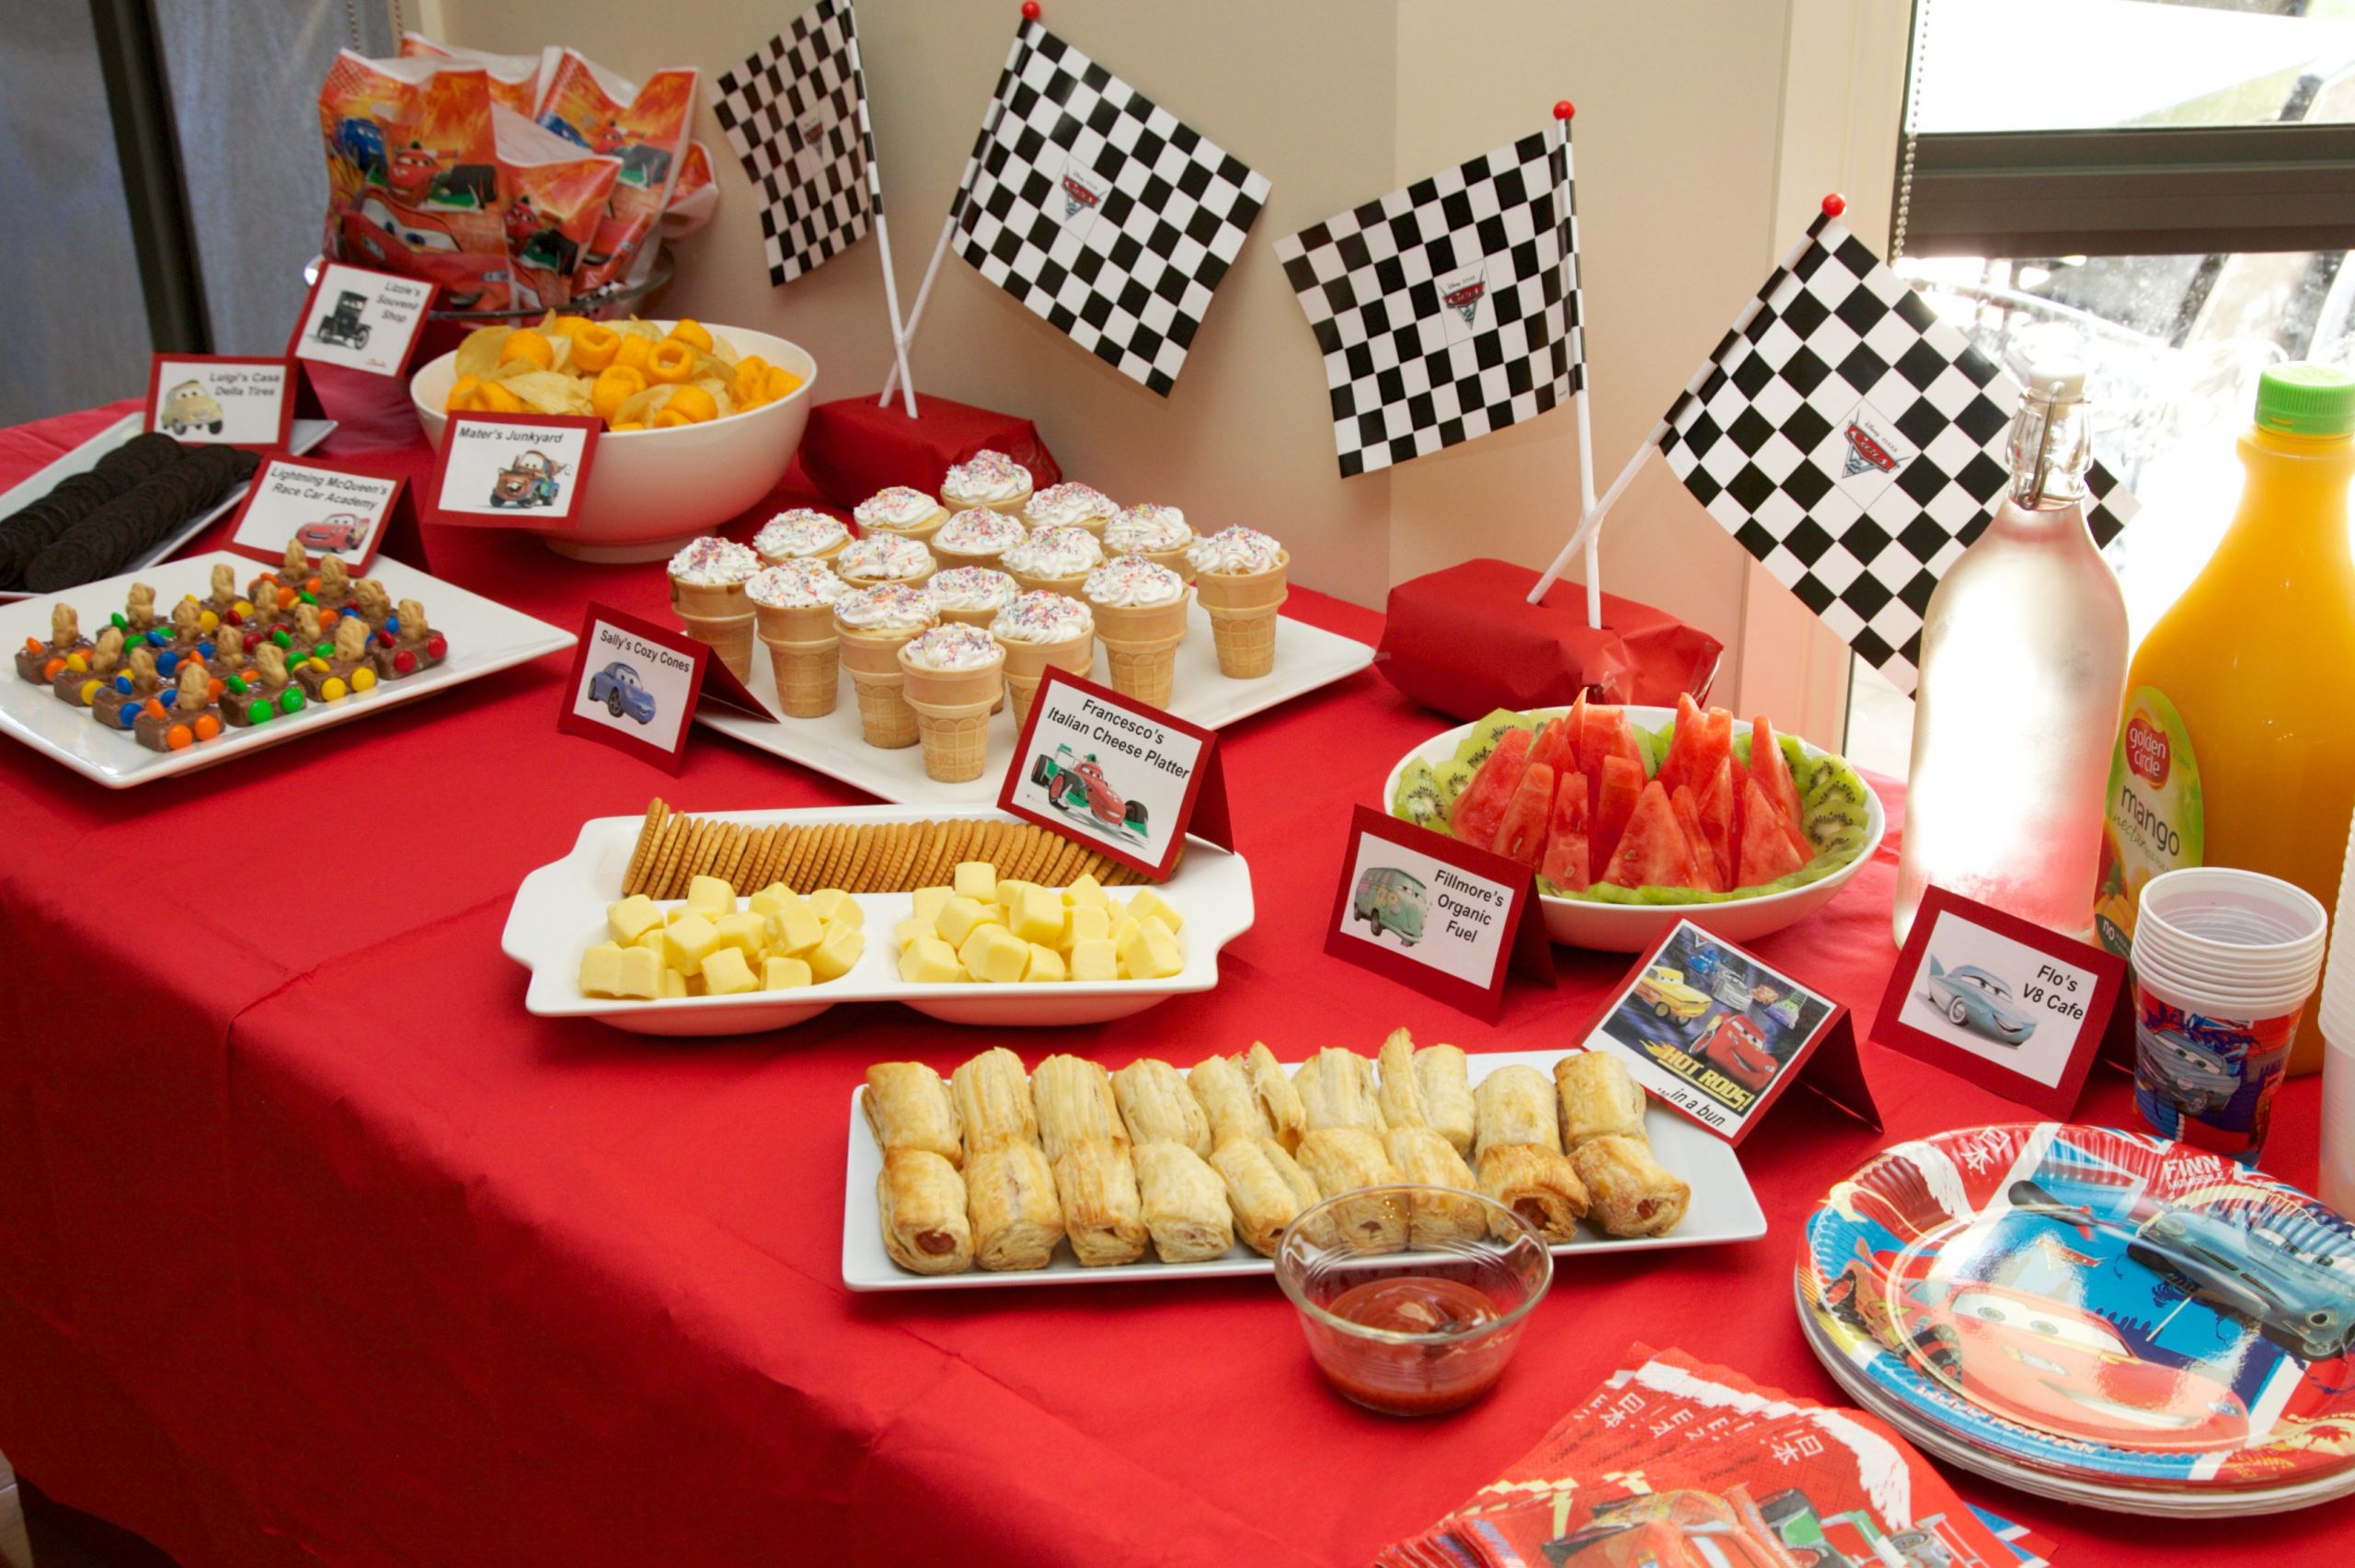 Children Birthday Party Food Ideas
 How to throw a BIG kids birthday party on a small bud